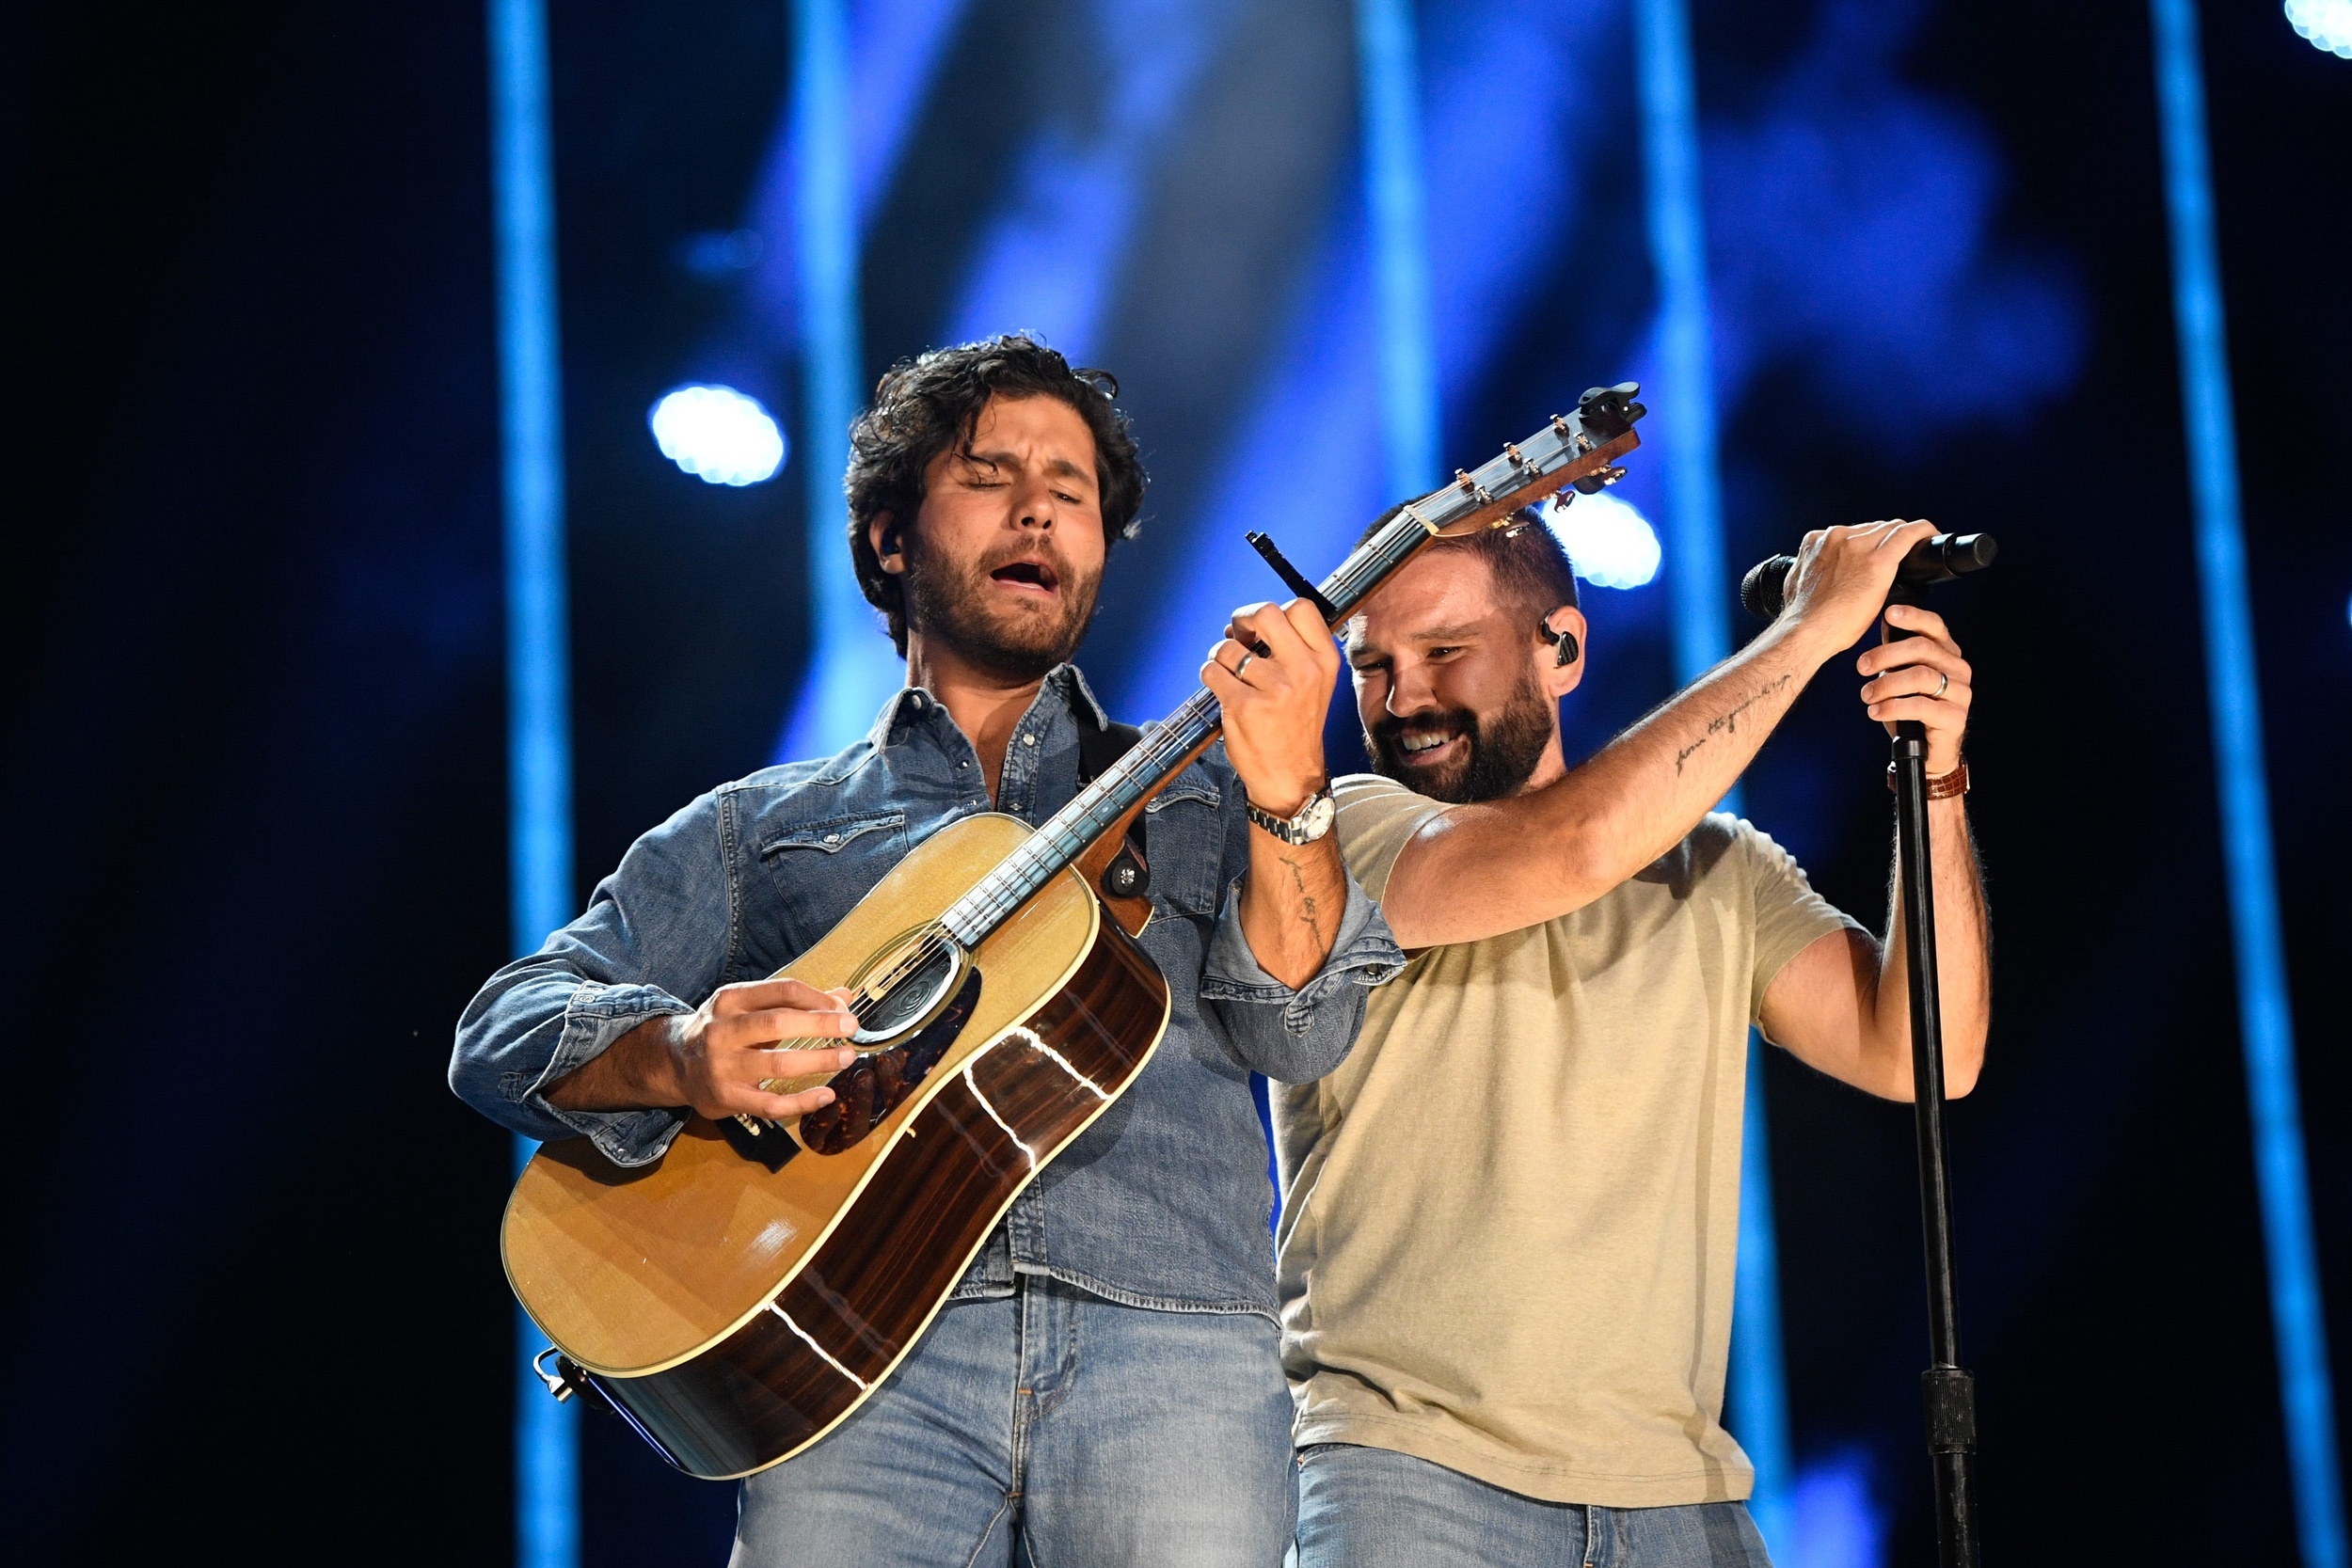 <p>This three-time Grammy Award-winning country-rock duo takes to the road for a 19-city tour that supports 2023's <a href="https://www.youtube.com/watch?v=LRSpeDrB53o"><em>Bigger Houses</em>. </a>While the bloom might be somewhat have come off the Dan + Shay rose in turns of overwhelming country popularity, this is still one solid live act to see. Known for their high-energy sets, the boys deliver the goods every time out, and this year should be no different. The fun begins Feb. 29 in Greenville, S.C., and ends in Boston on April 13.</p><p>You may also like: <a href='https://www.yardbarker.com/entertainment/articles/the_definitive_ranking_of_every_tgif_show_030424/s1__30231863'>The definitive ranking of every TGIF show</a></p>